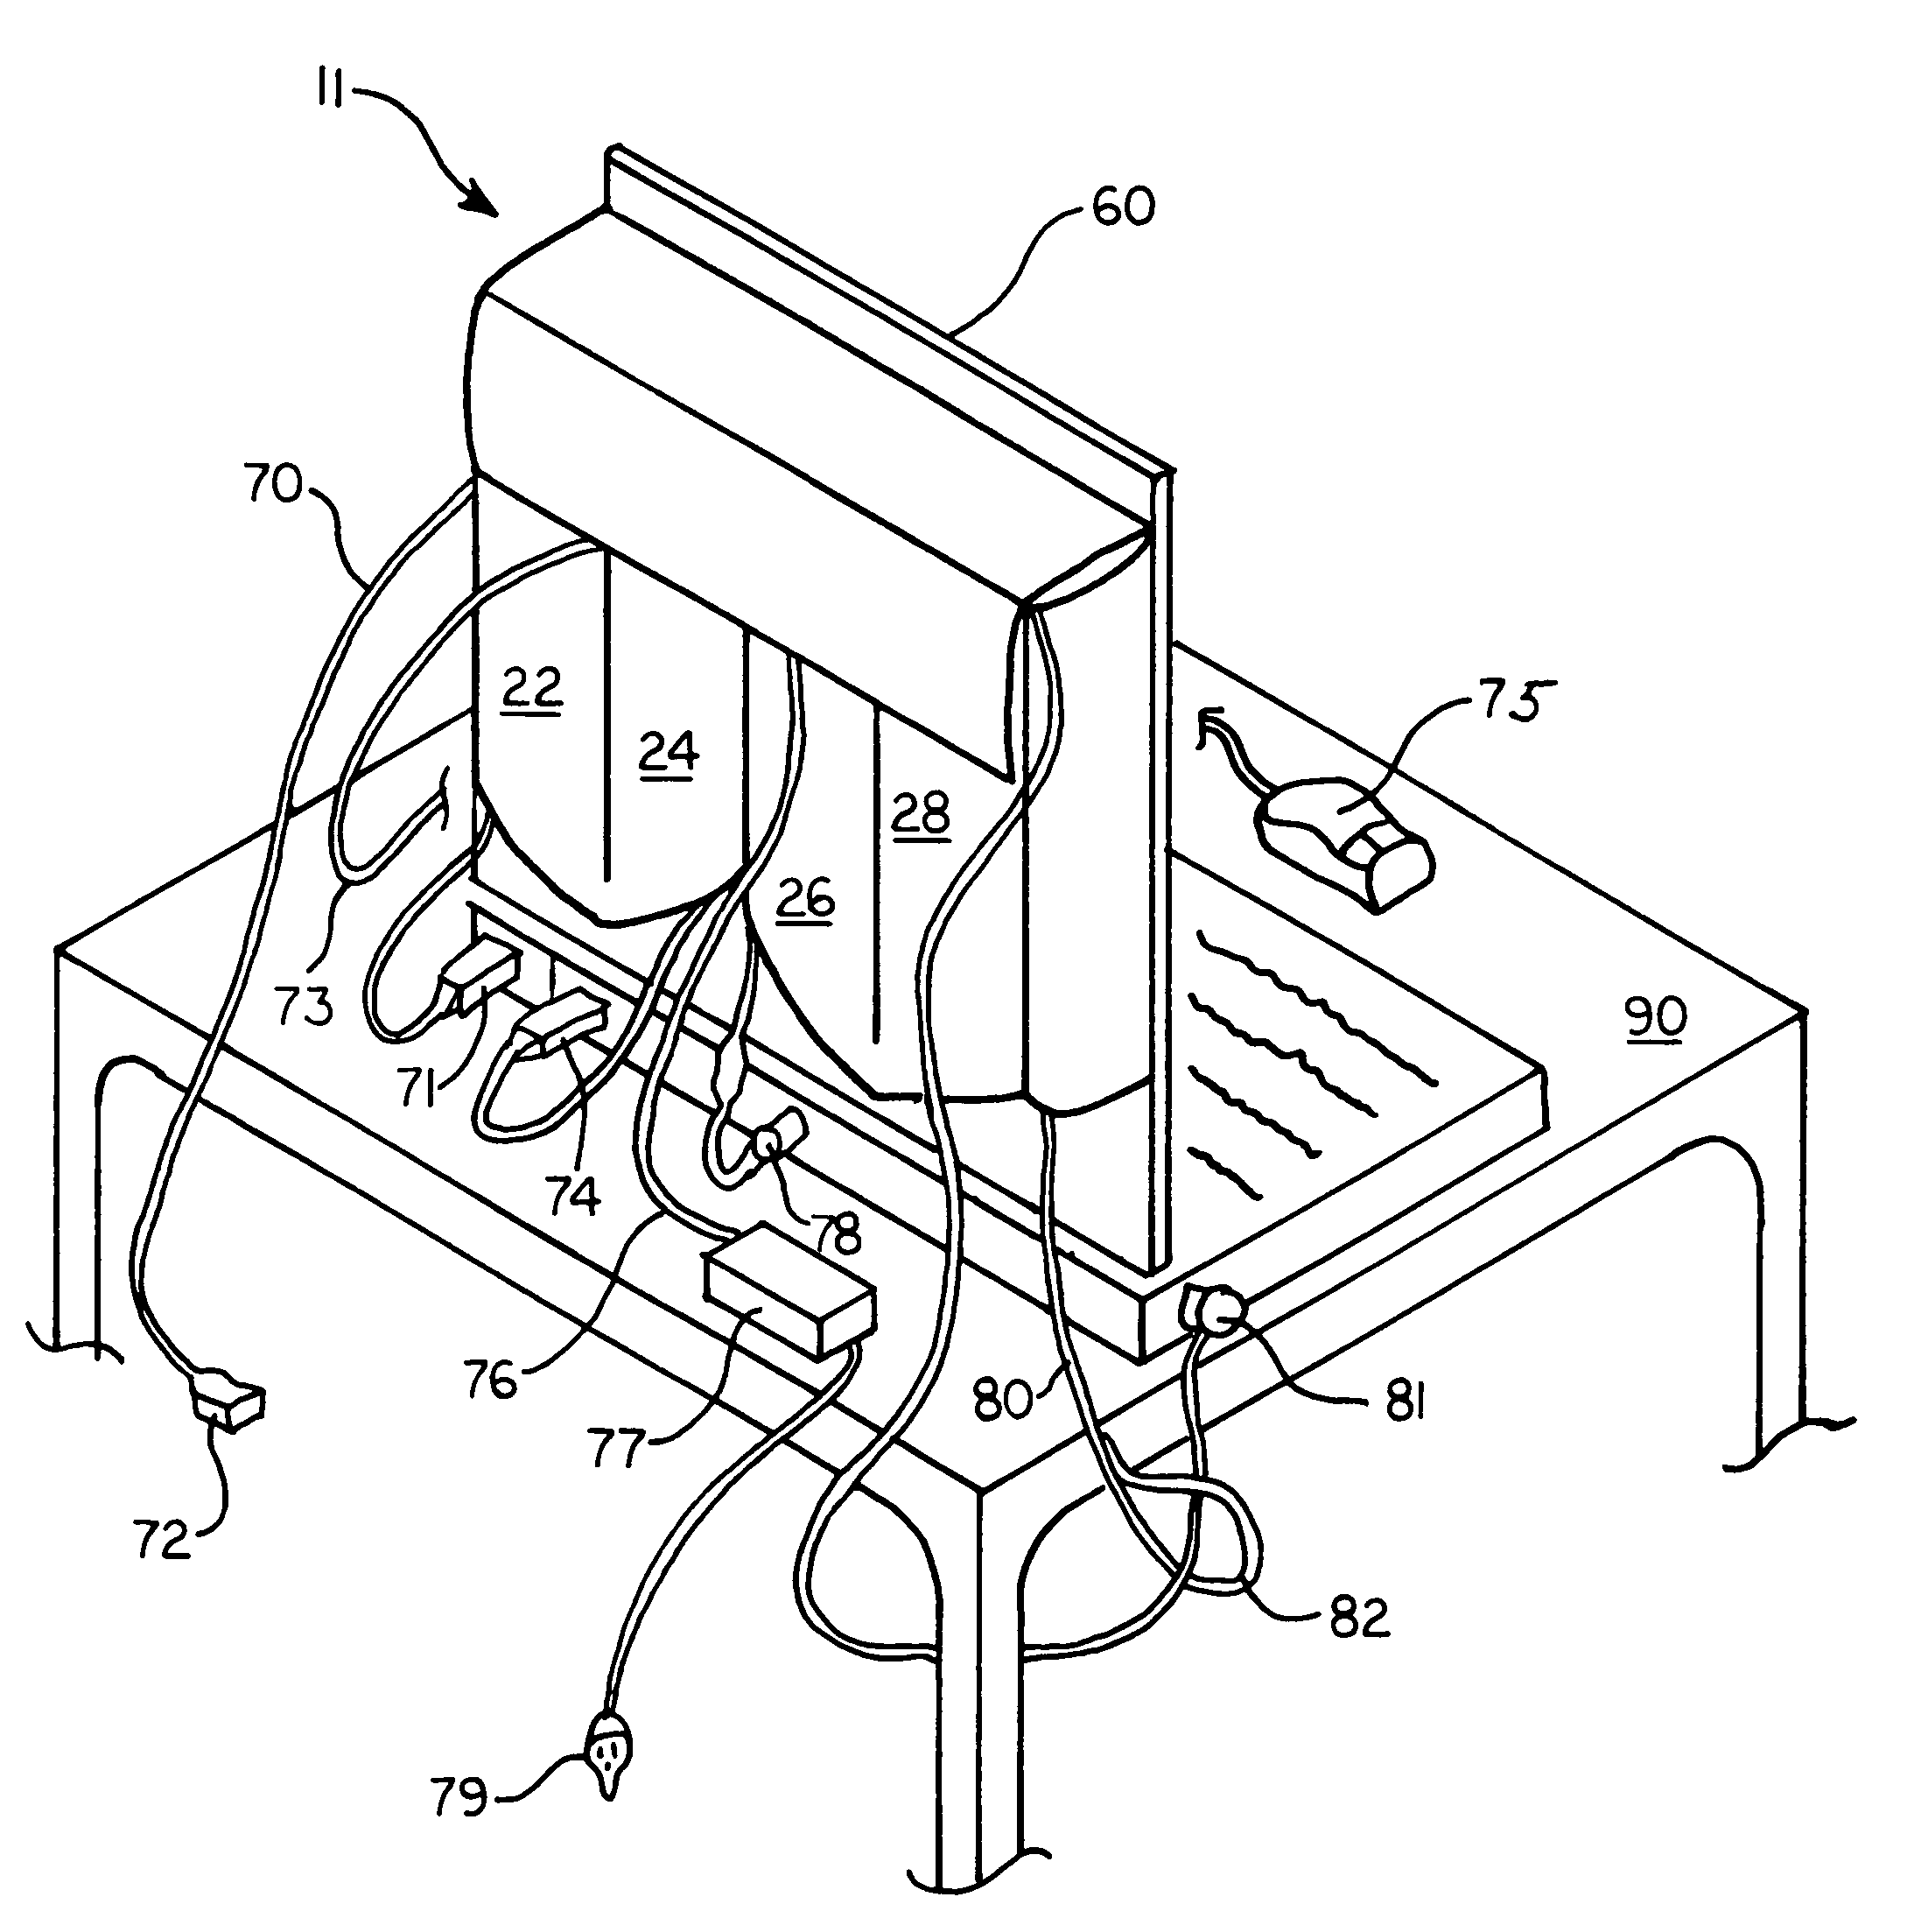 Computer equipment storing and transporting organizer system